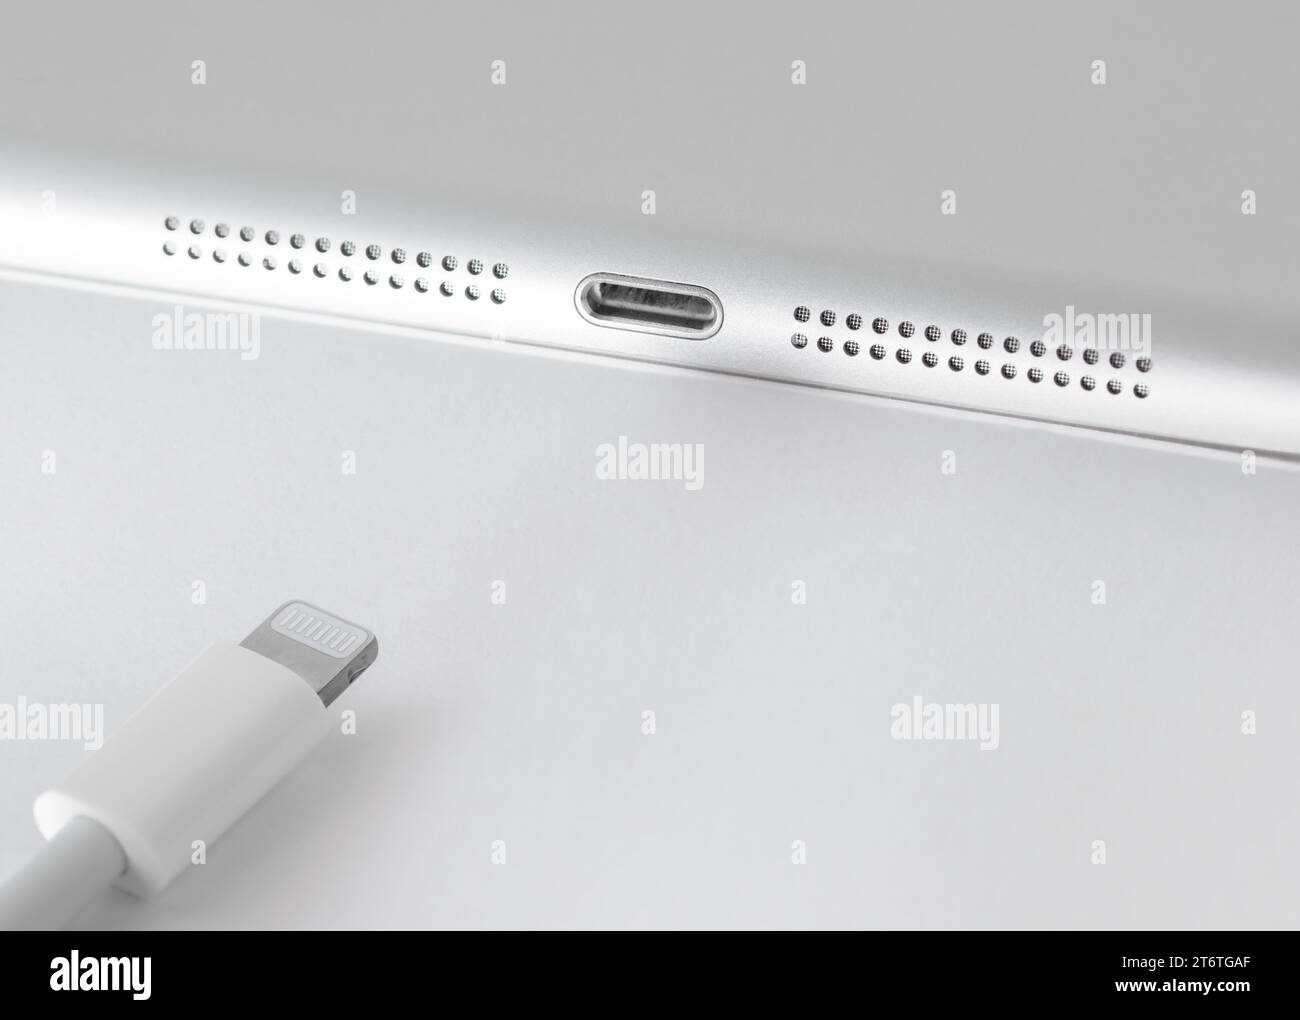 View of Apple Lightning cable and gadget on a white table with empty space, close-up. Stock Photo